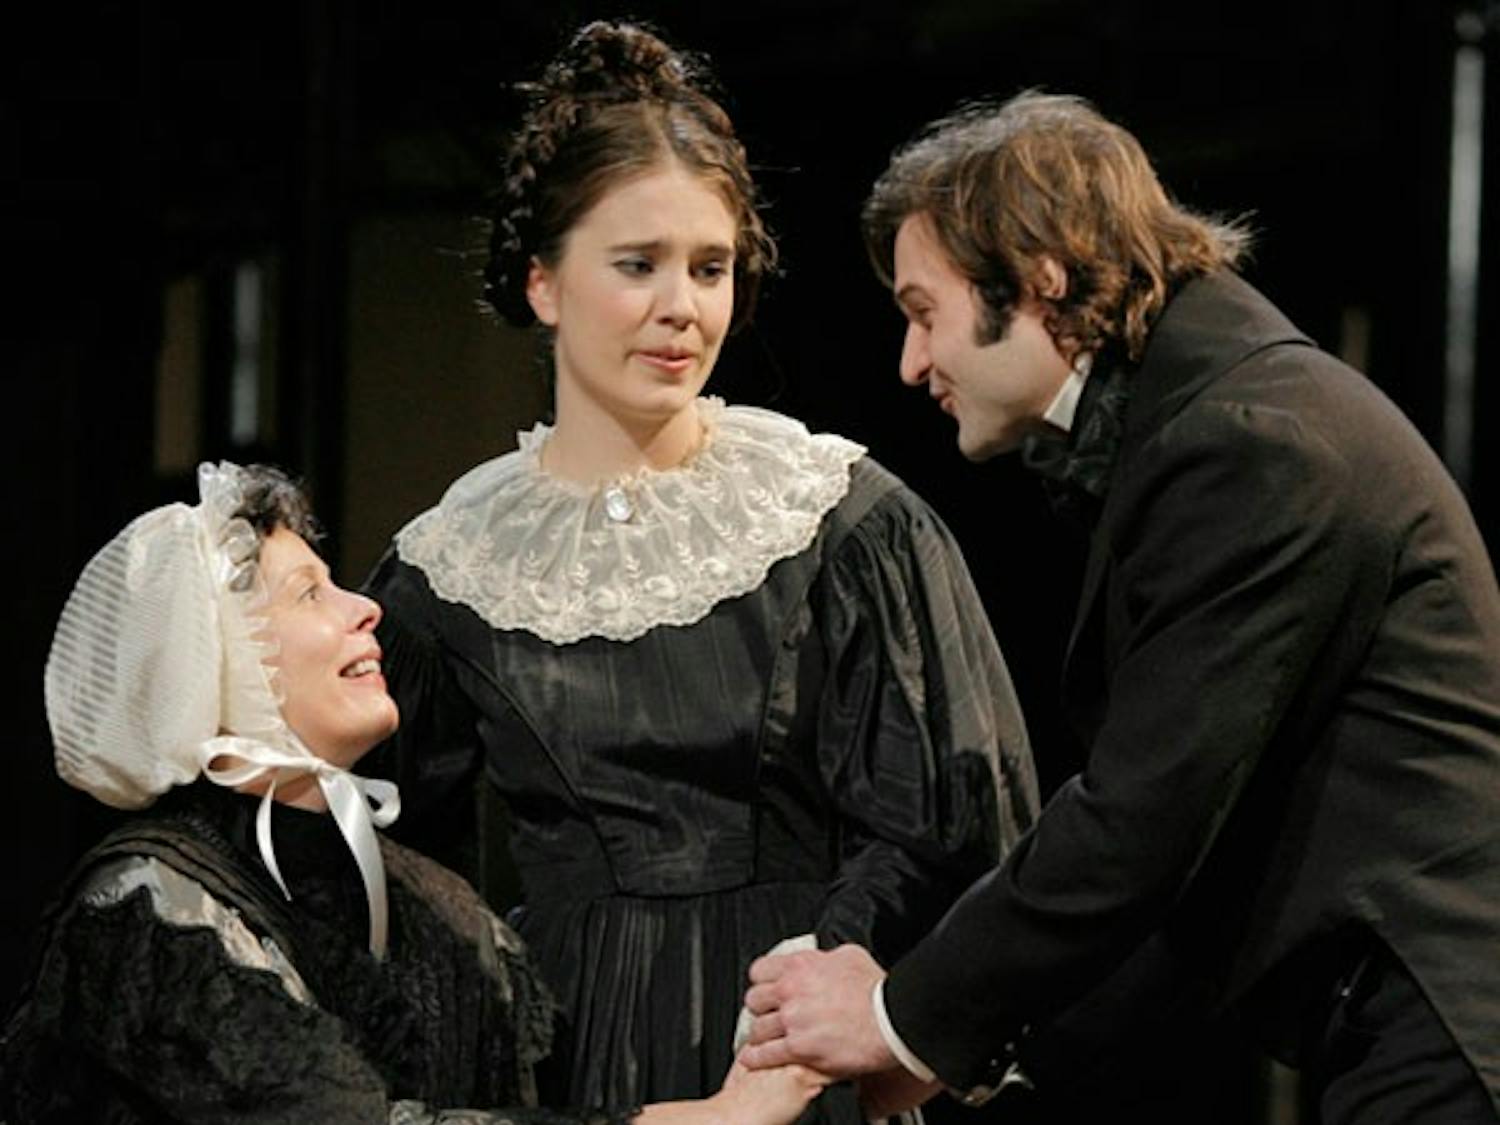 Julie Fishell, Marianne Miller and Justin Adams perform a scene from “Nicholas Nickleby.” Courtesy of Jon Gardiner